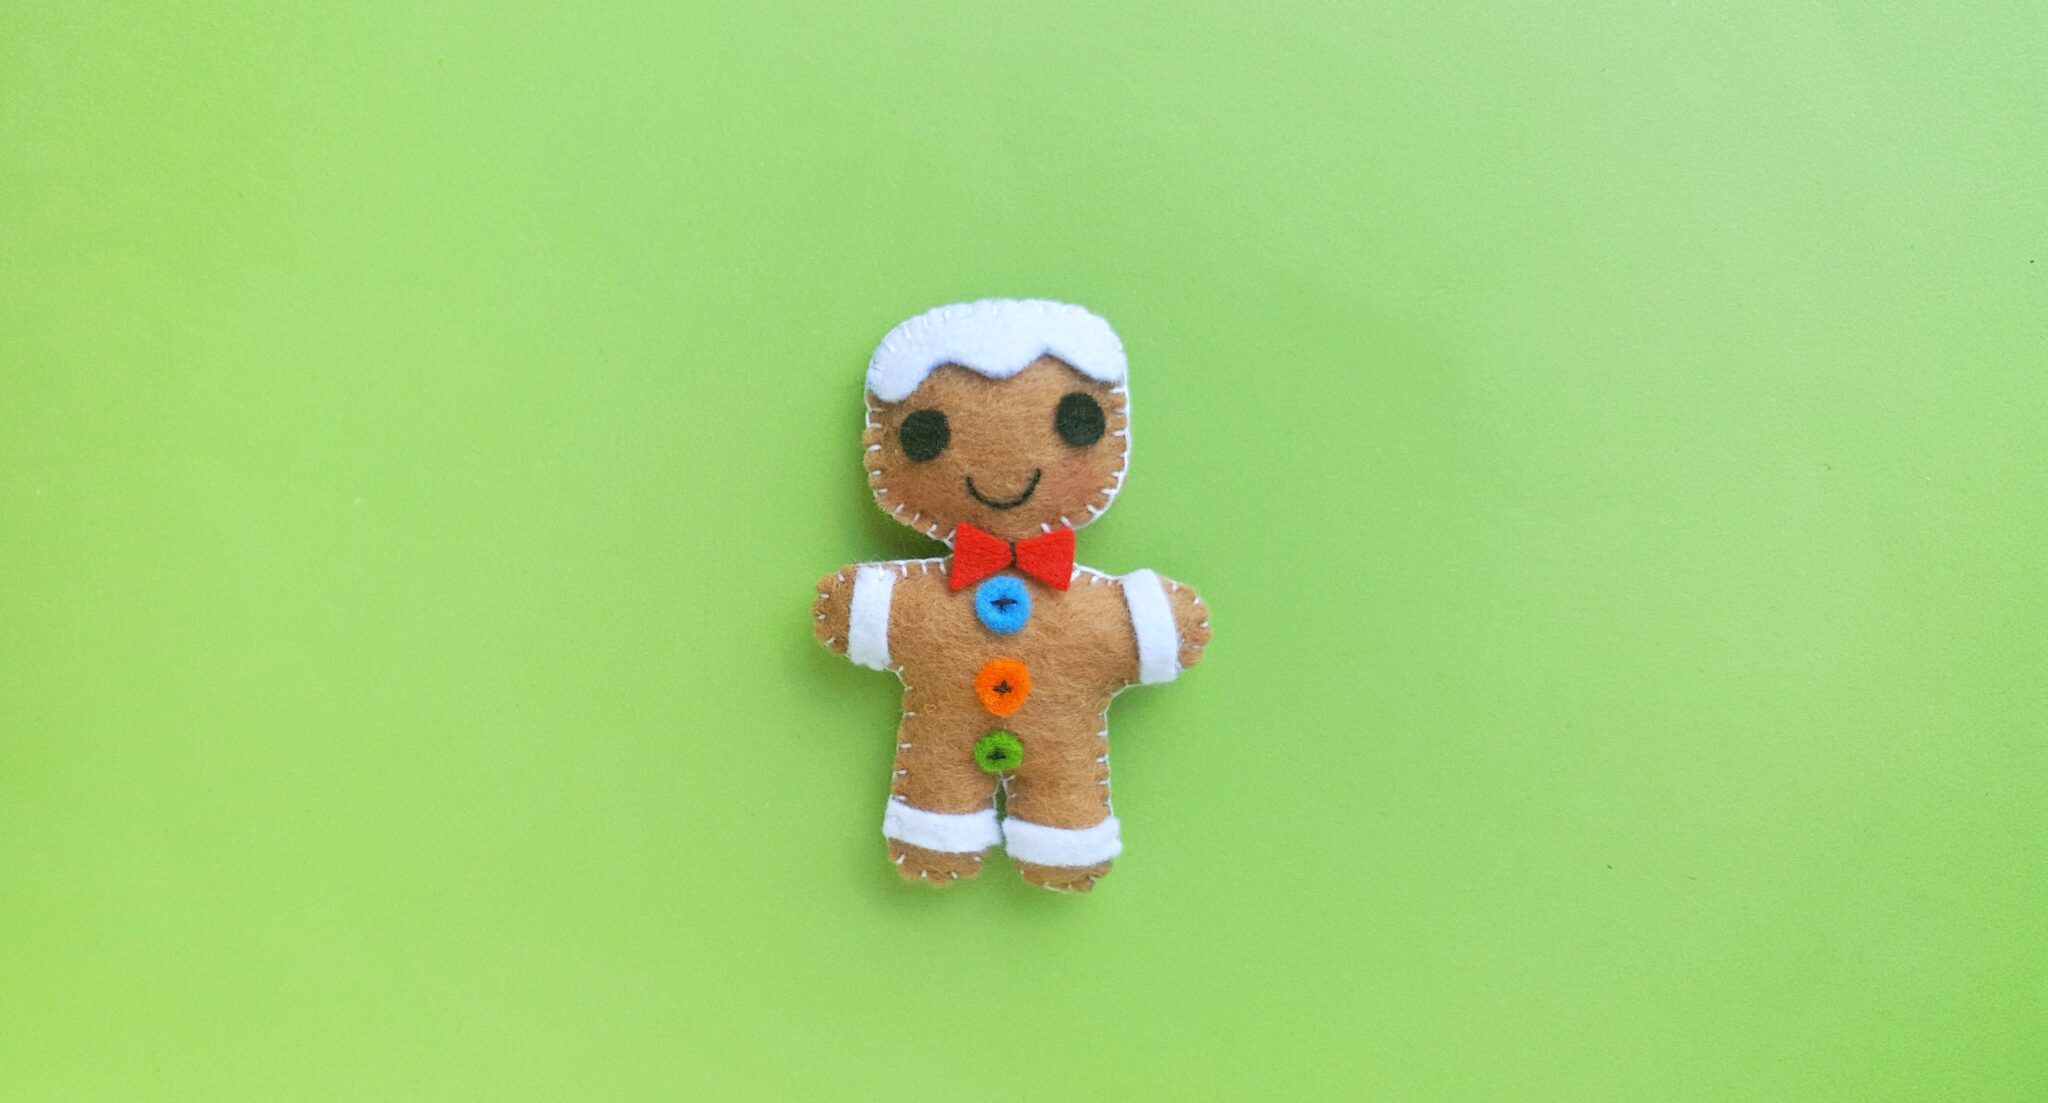 Final product of the Gingerbread Man Christmas Ornament. 